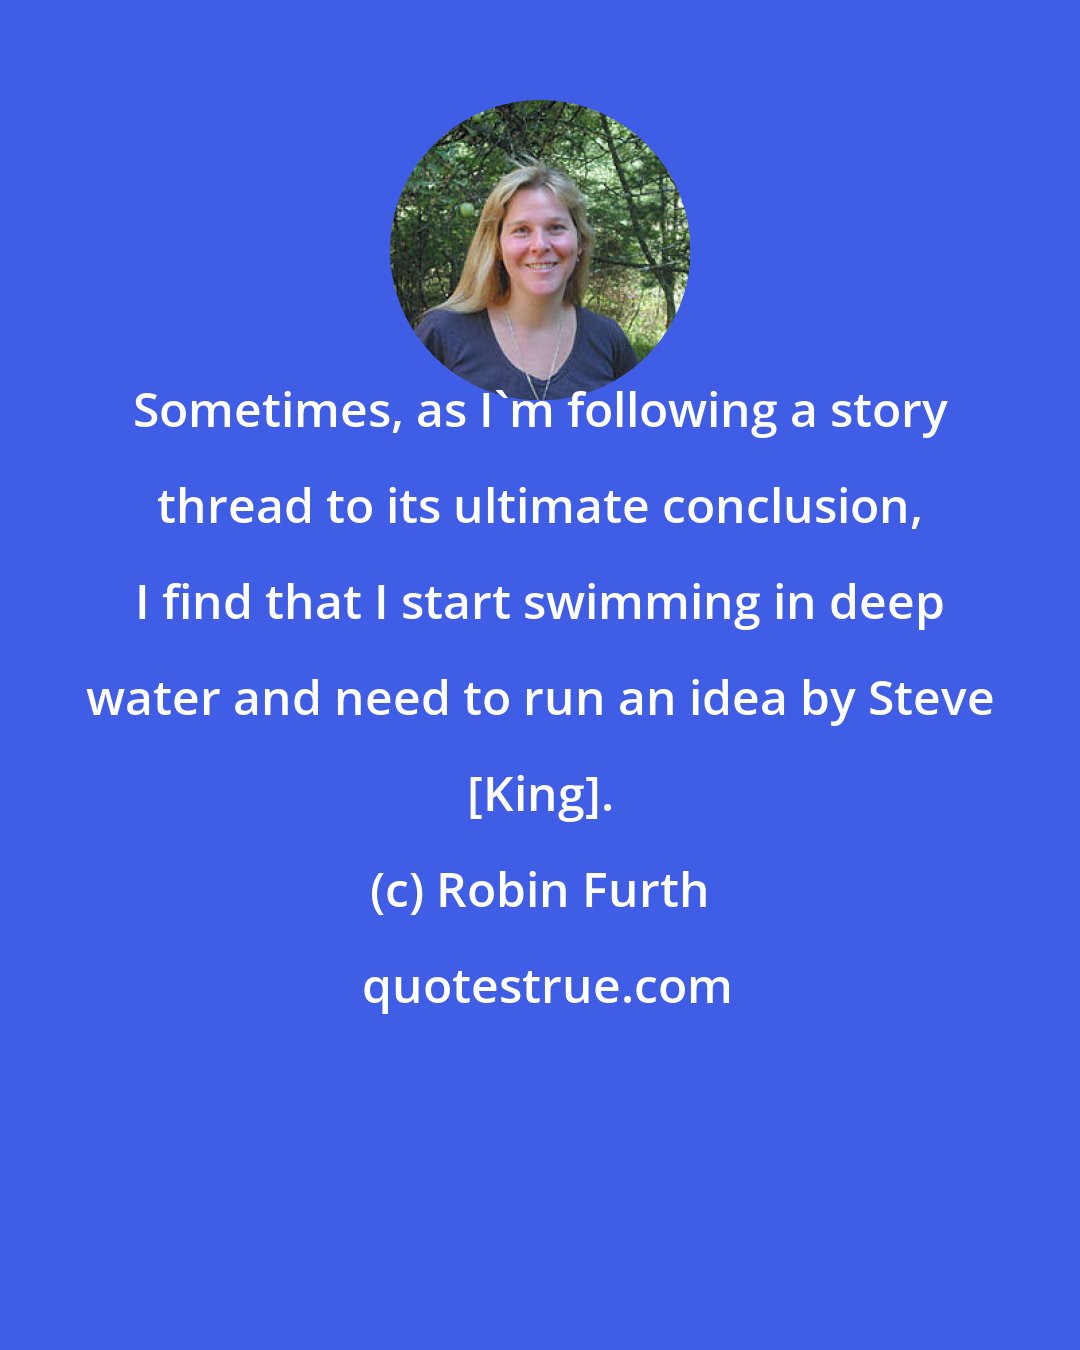 Robin Furth: Sometimes, as I'm following a story thread to its ultimate conclusion, I find that I start swimming in deep water and need to run an idea by Steve [King].